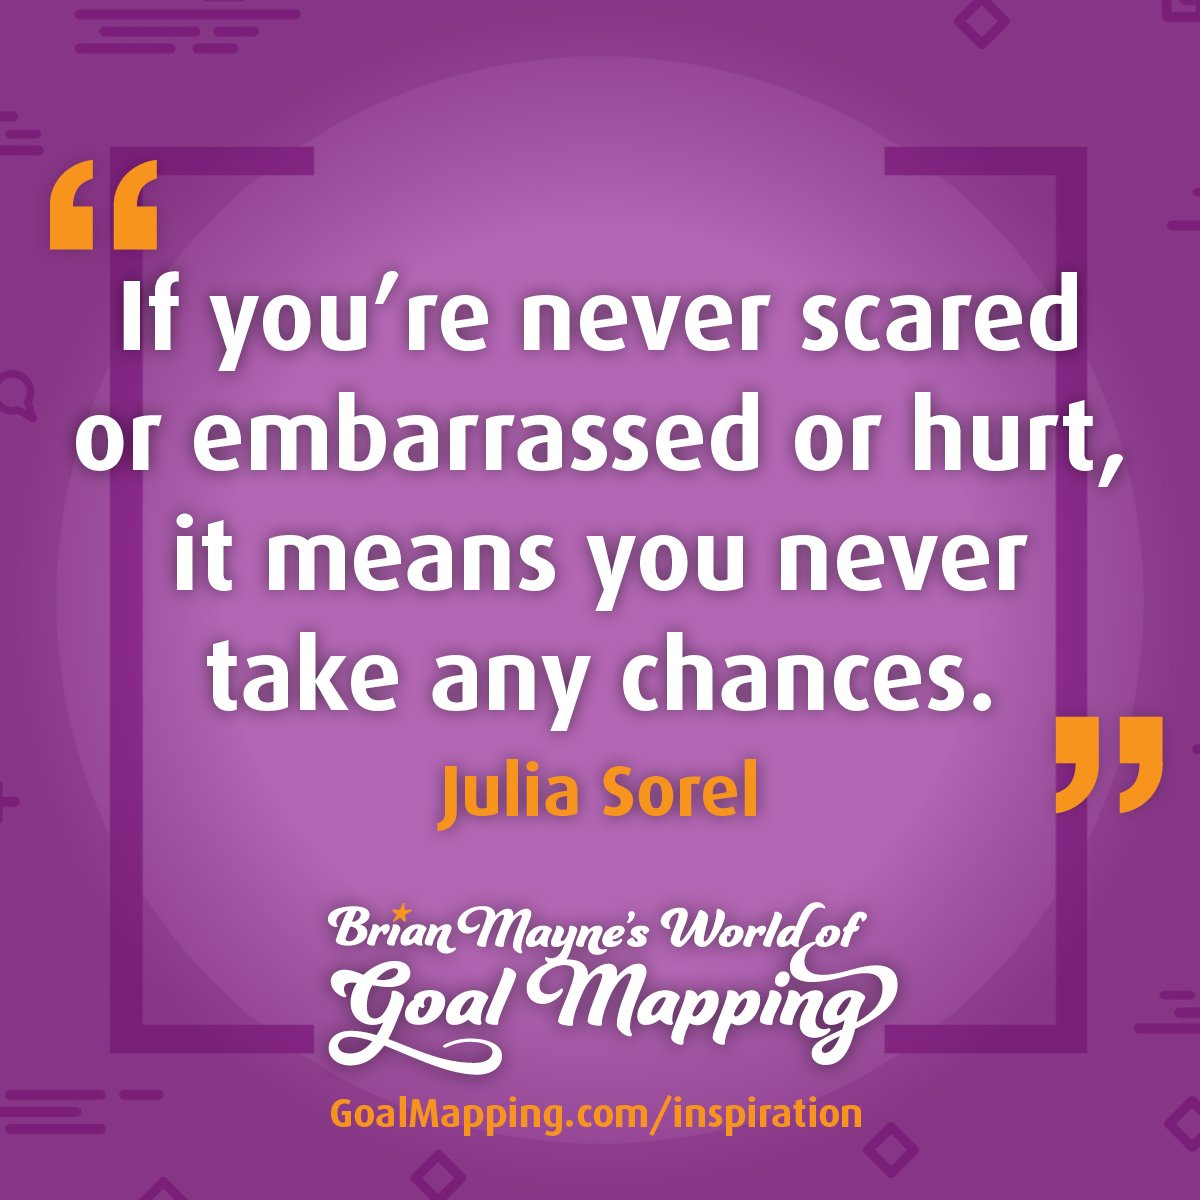 "If you’re never scared or embarrassed or hurt, it means you never take any chances." Julia Sorel